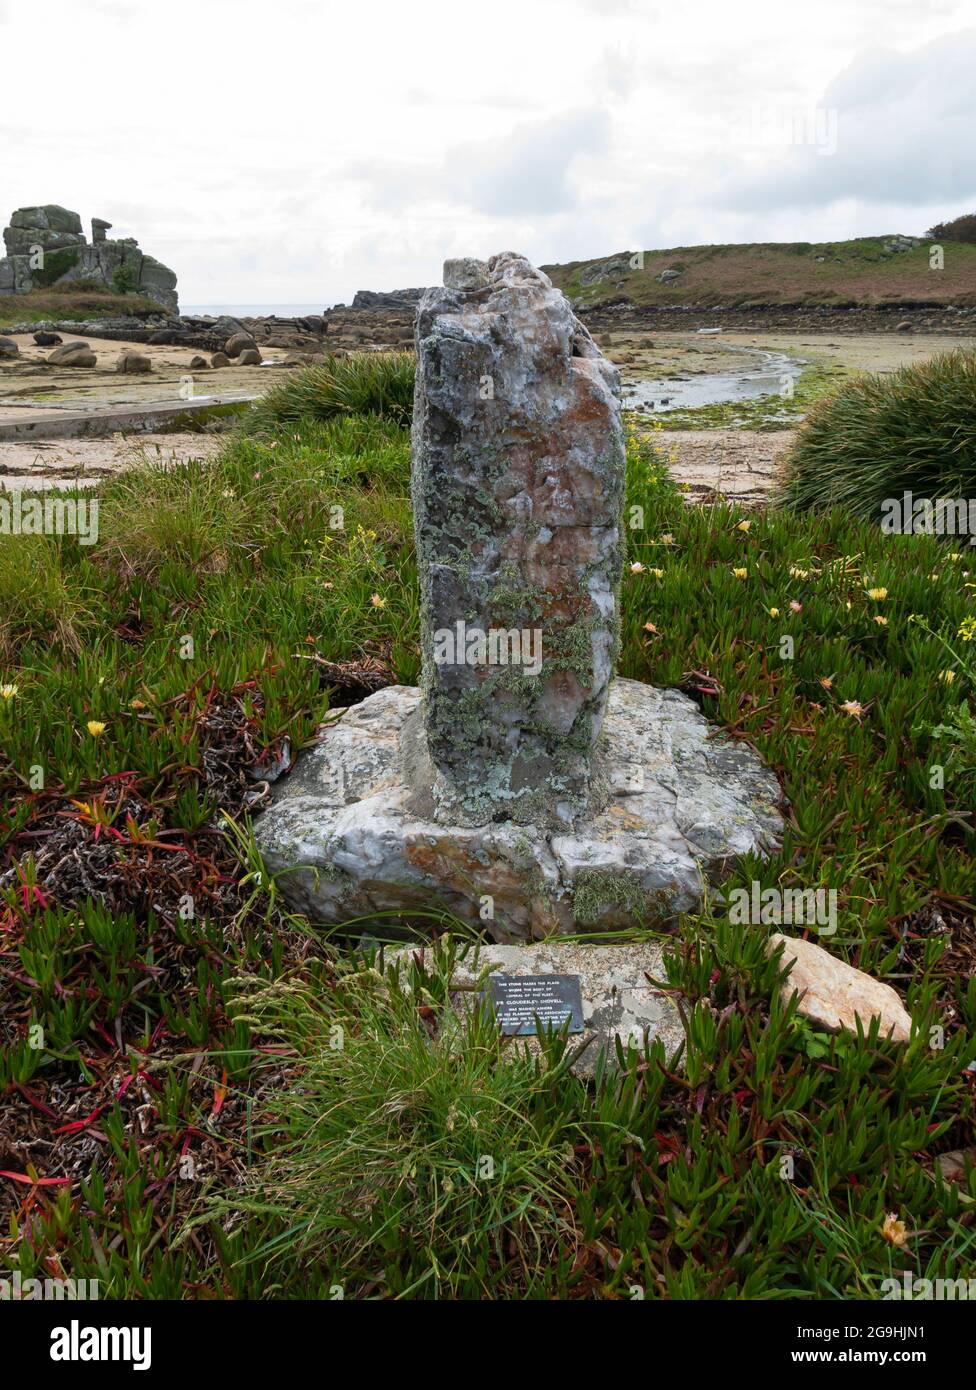 Admiral der Flotte, Sir Cloudesley Shovel Monument, Porth Hellick, St Mary's, Isles of Scilly, Cornwall, England, Großbritannien. Stockfoto